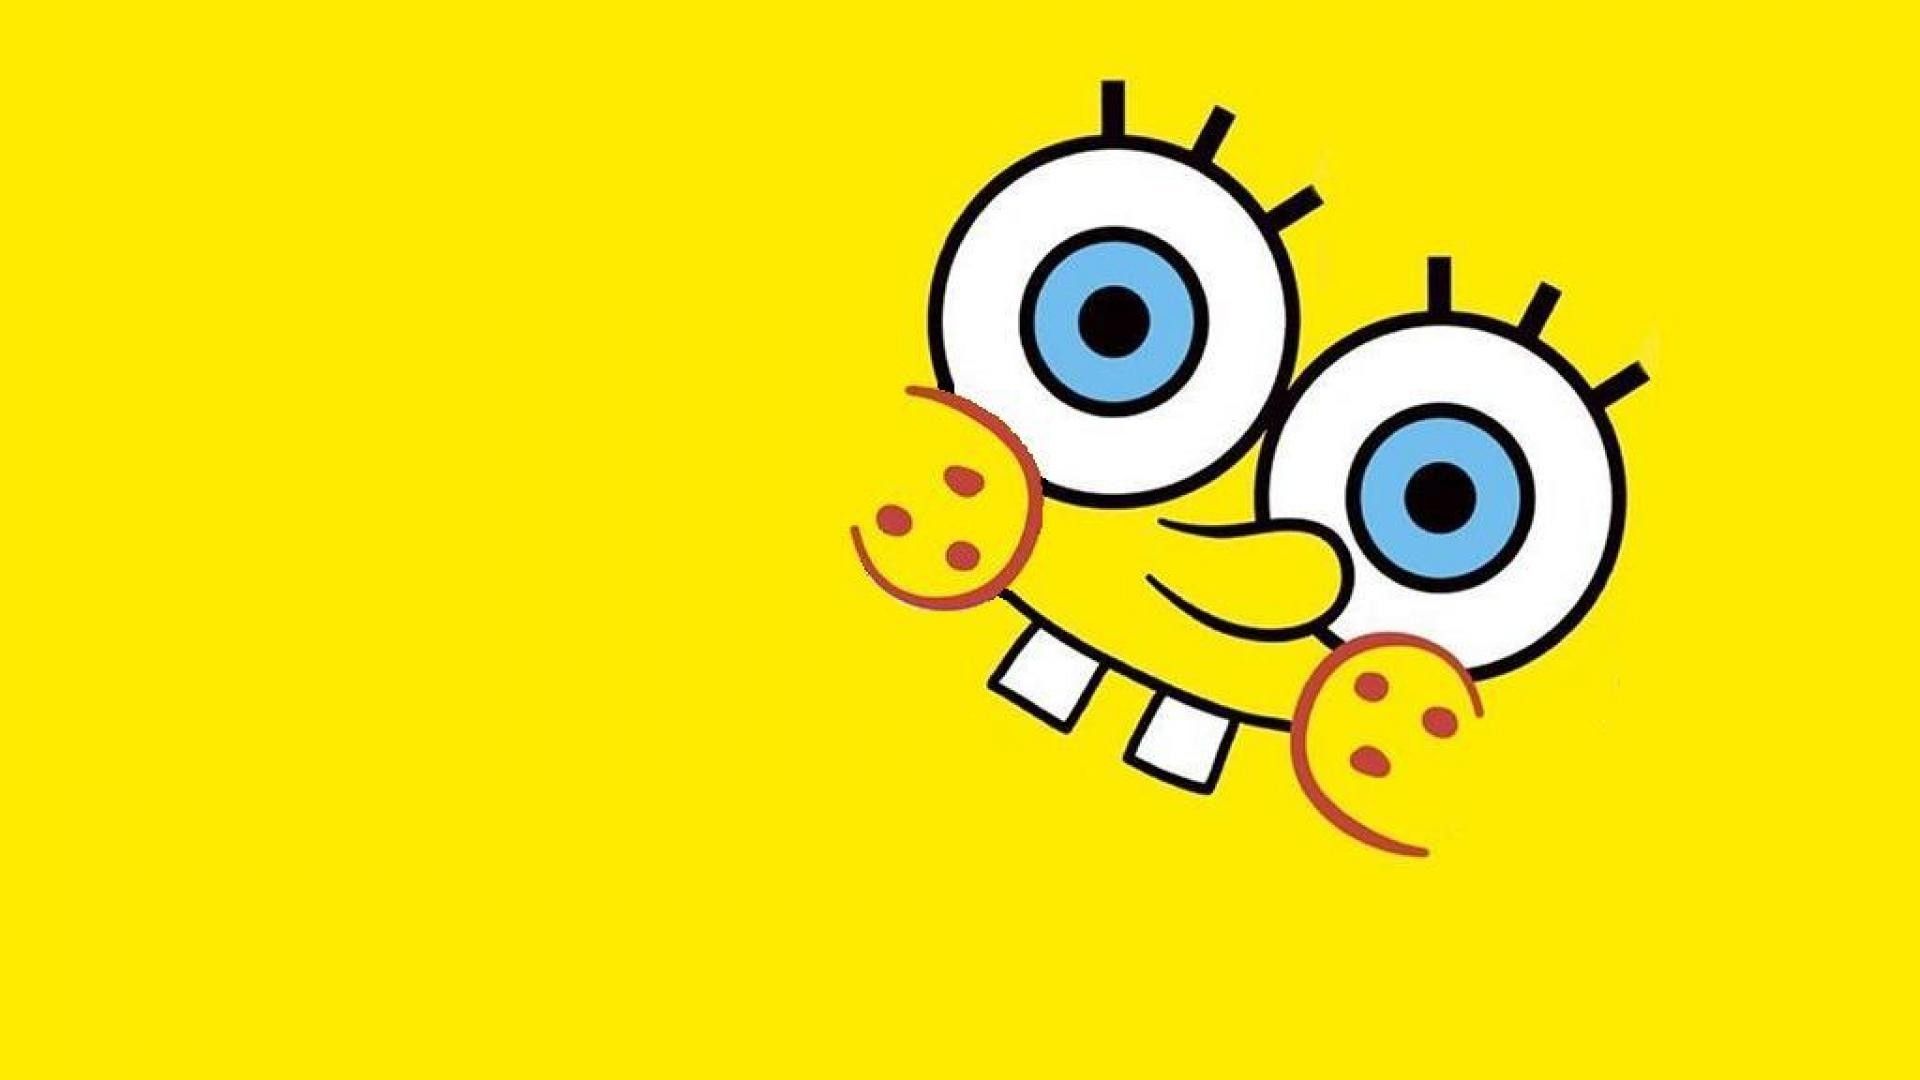 A yellow background with a cartoon face on it - Light yellow